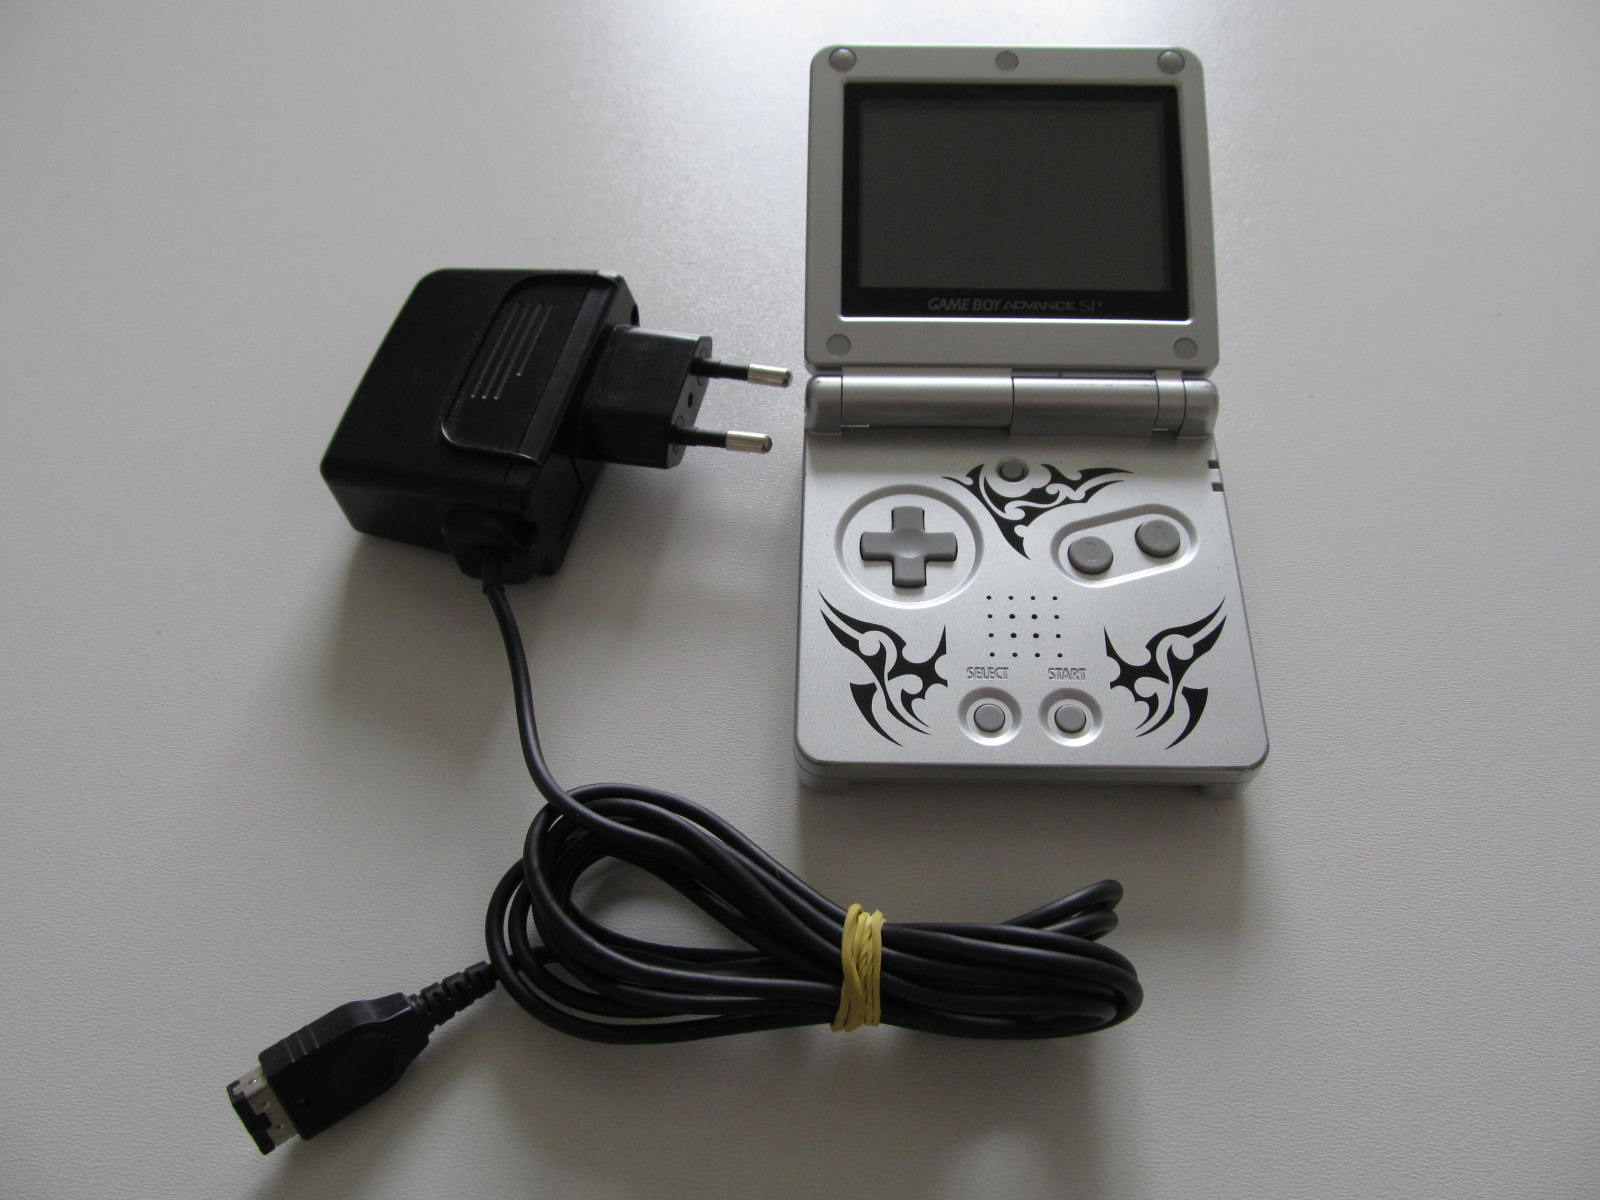 Gameboy Advance SP Console - Tribal Version